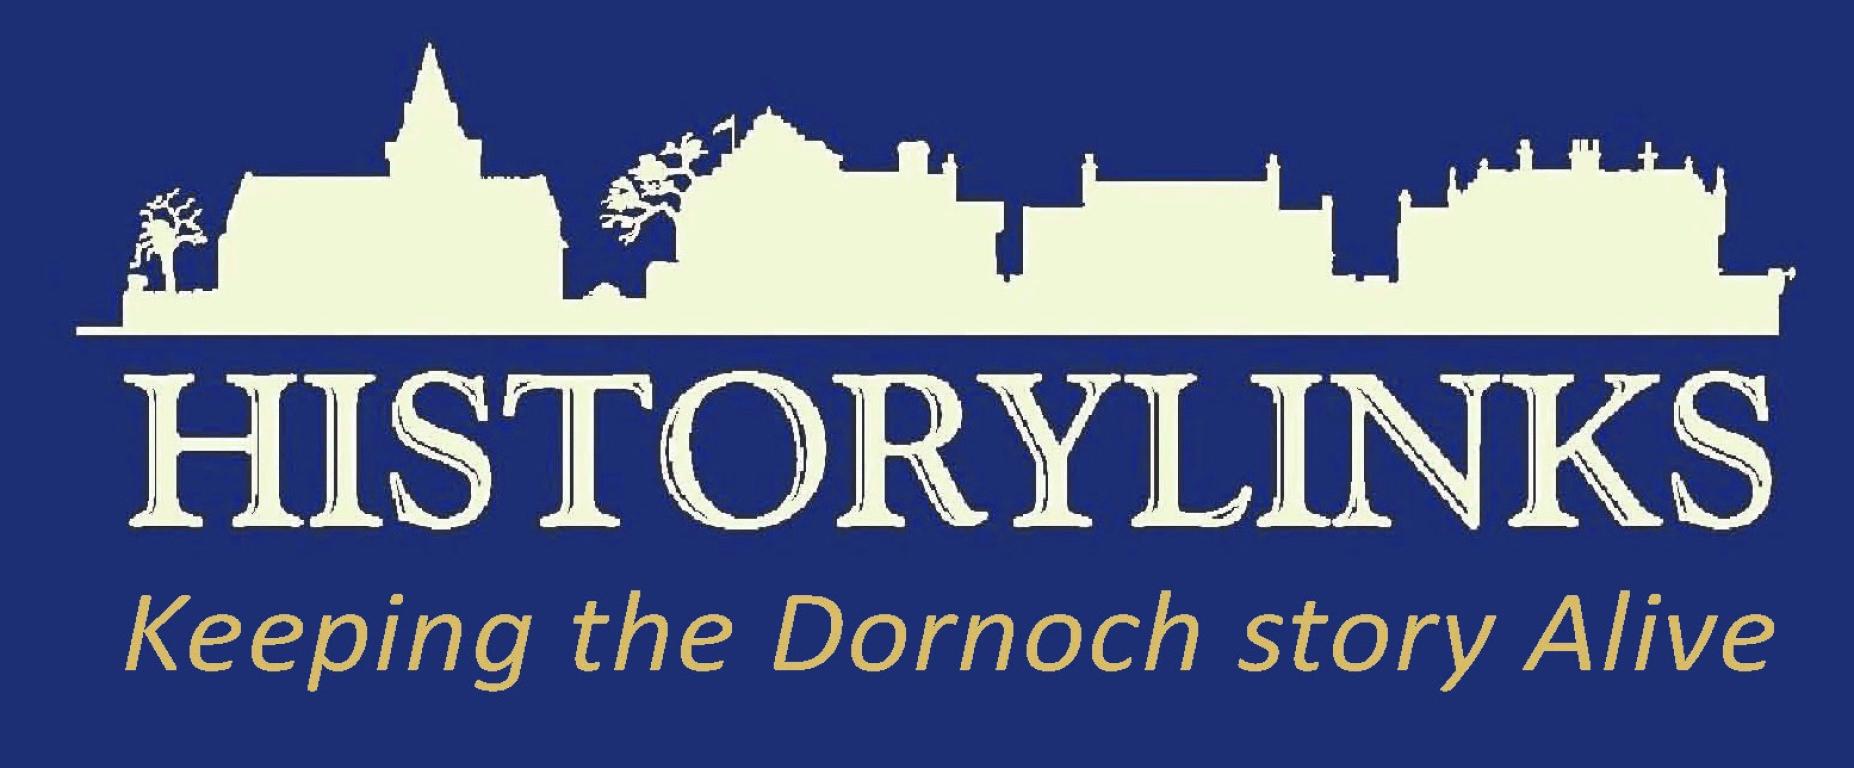 A logo with the shadows of buildings and trees in white on a dark blue background. Large white text reads 'Historylinks'. Yellow text reads 'Keeping the Dornoch story Alive'.